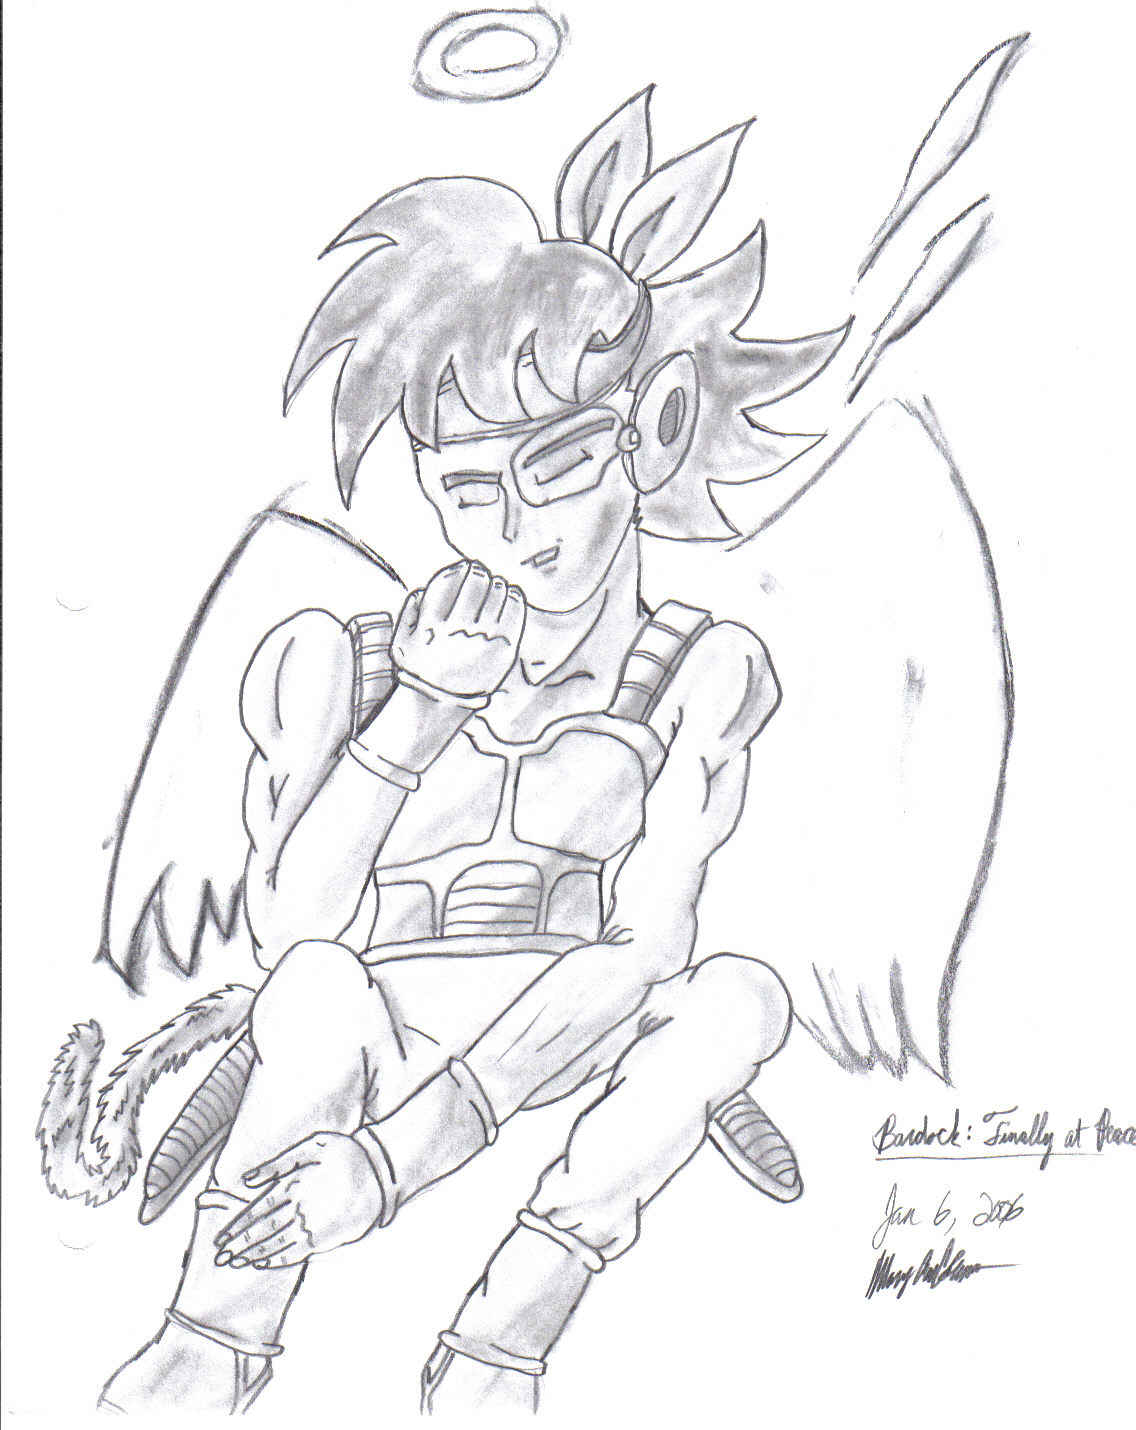 Bardock Angel by Midvalley_and_Dominique